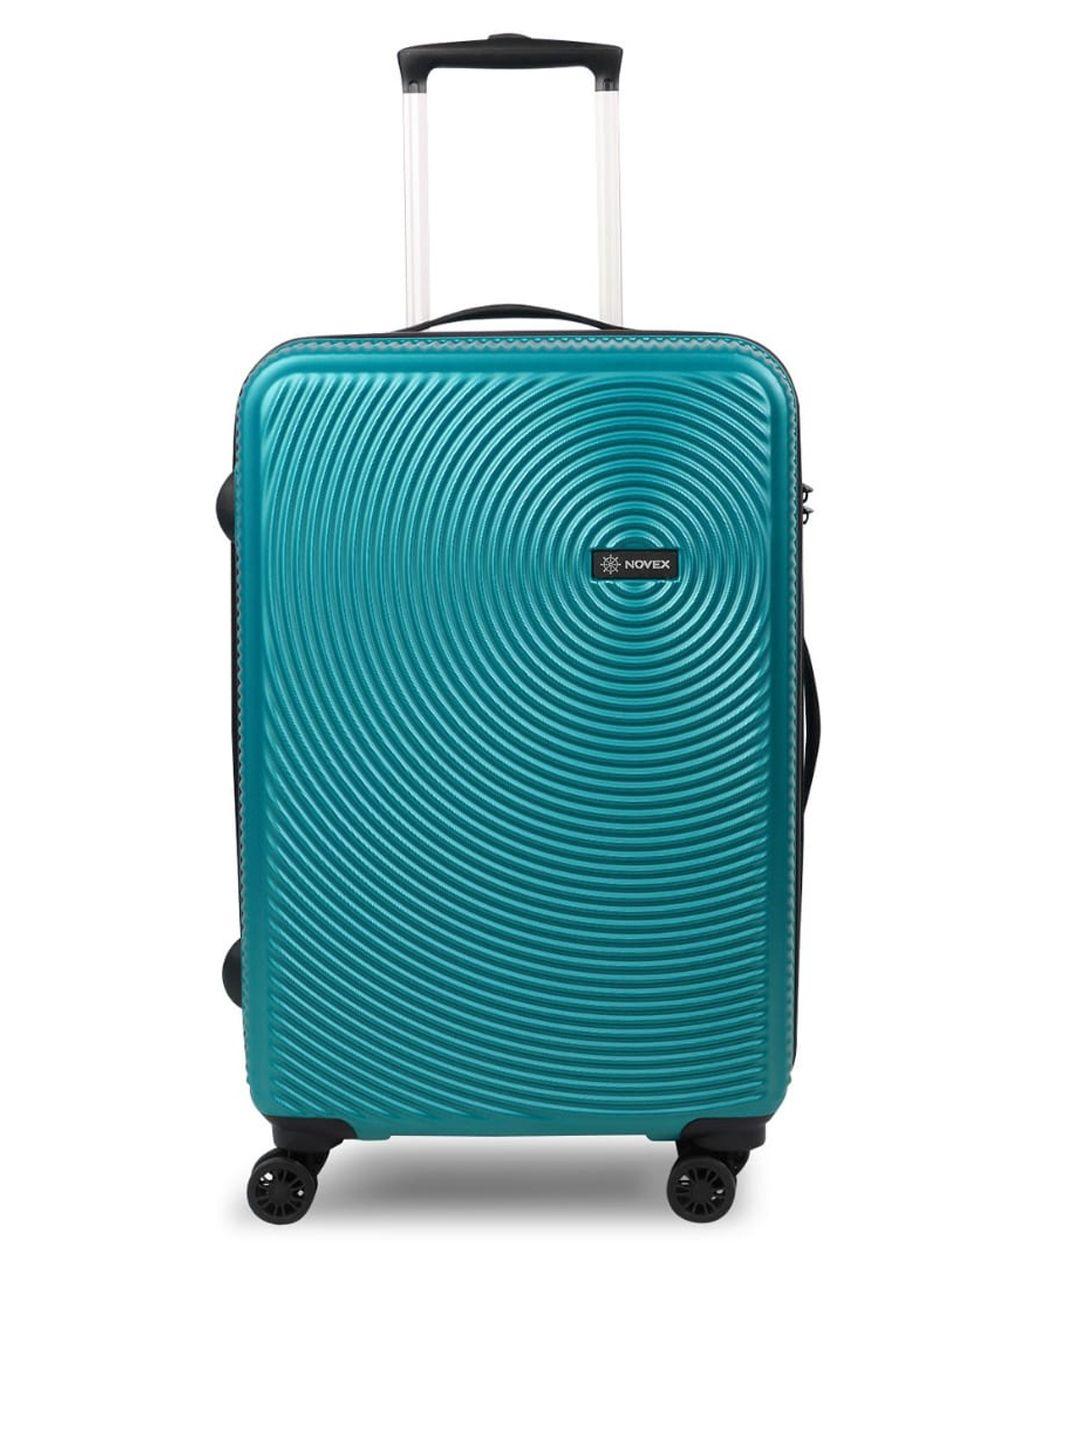 novex unisex sea-green textured hard sided large trolley suitcase